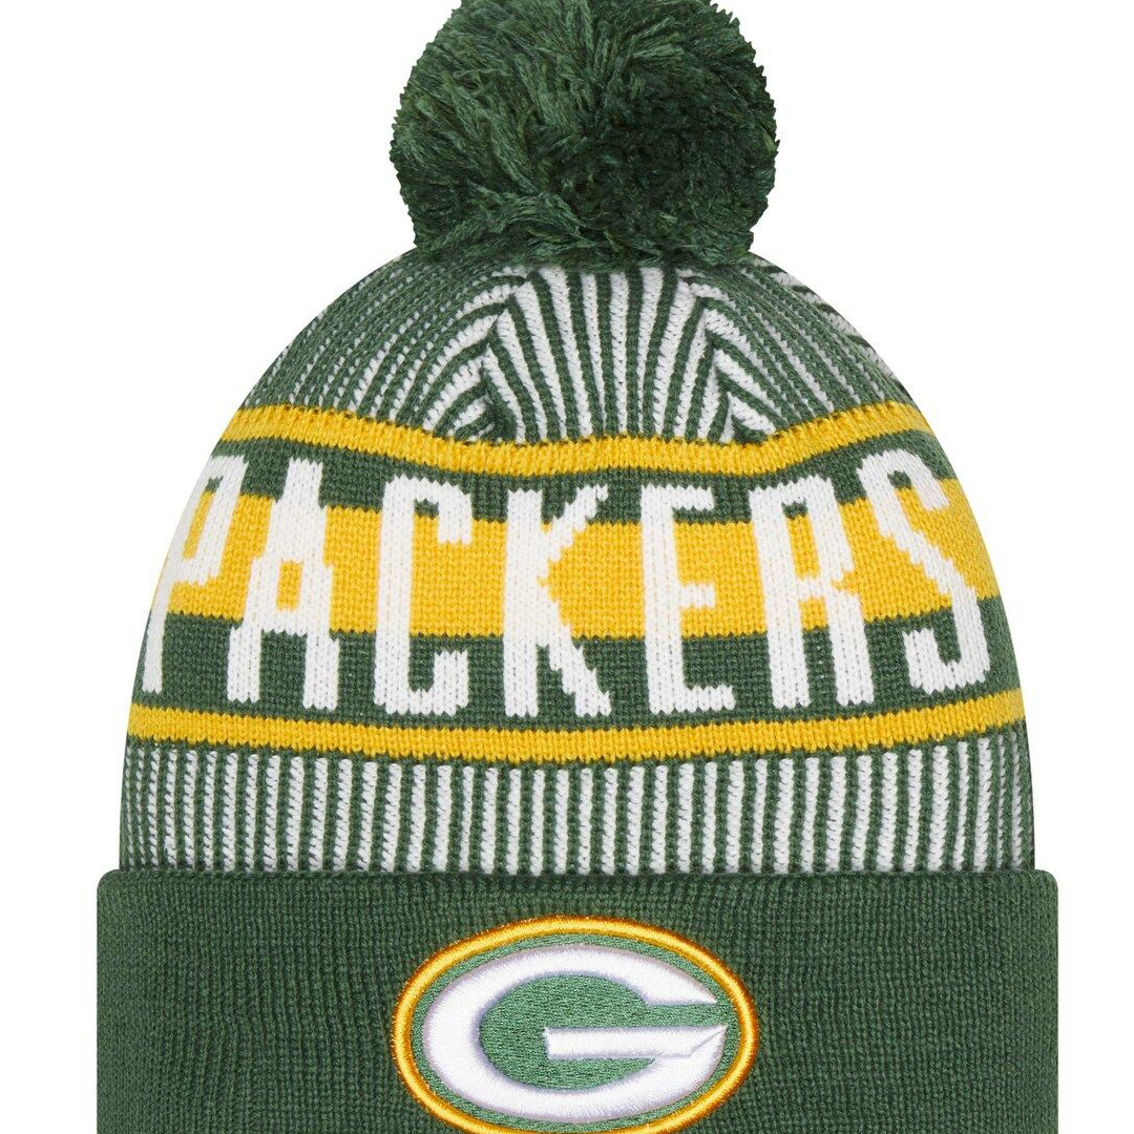 New Era Men's Green Green Bay Packers Striped Cuffed Knit Hat with Pom - Image 2 of 3